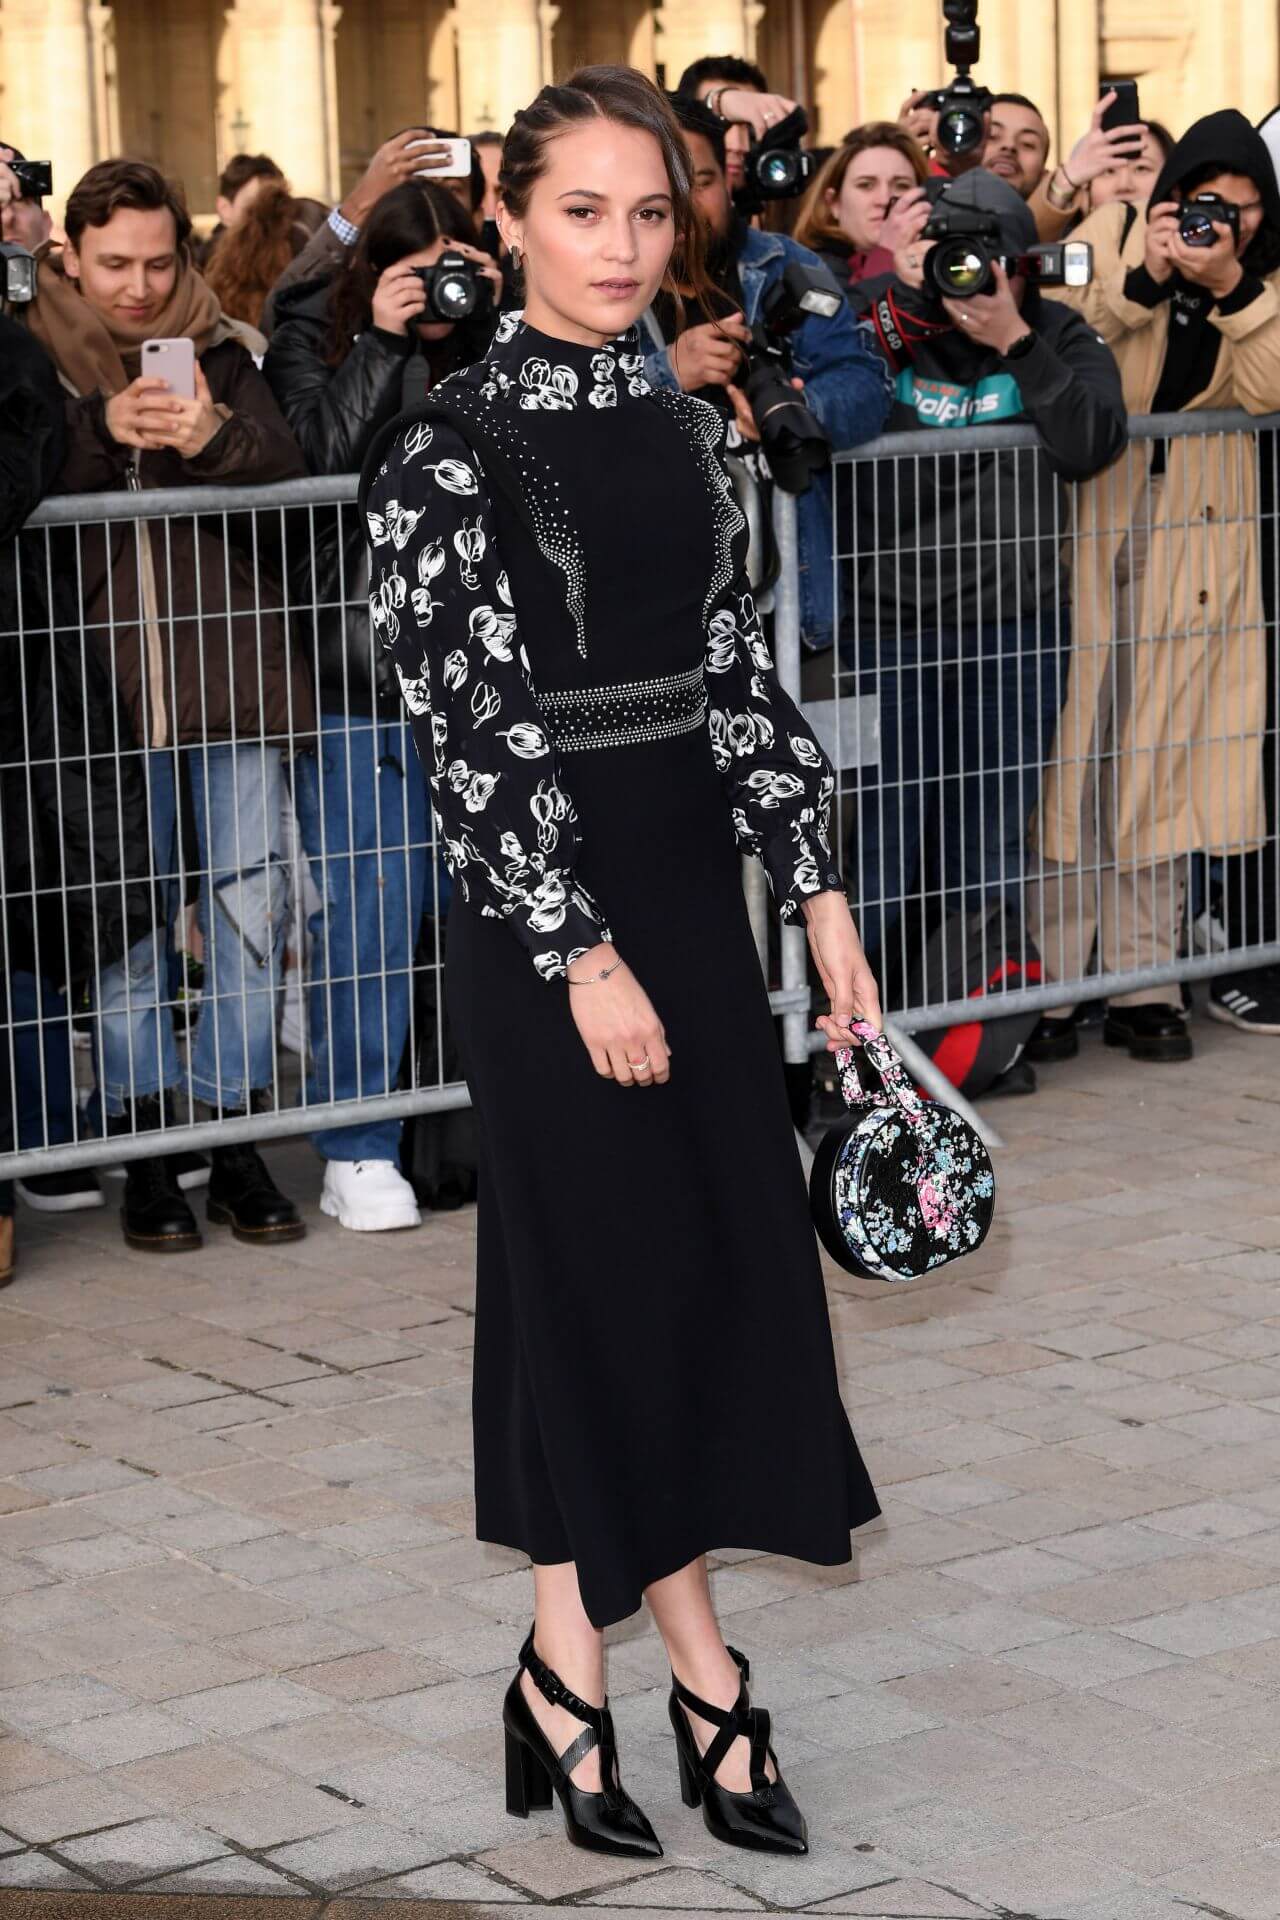 Alicia Vikander Gorgeous In Full Sleeves Printed High Neck Long Dress With Black Heels